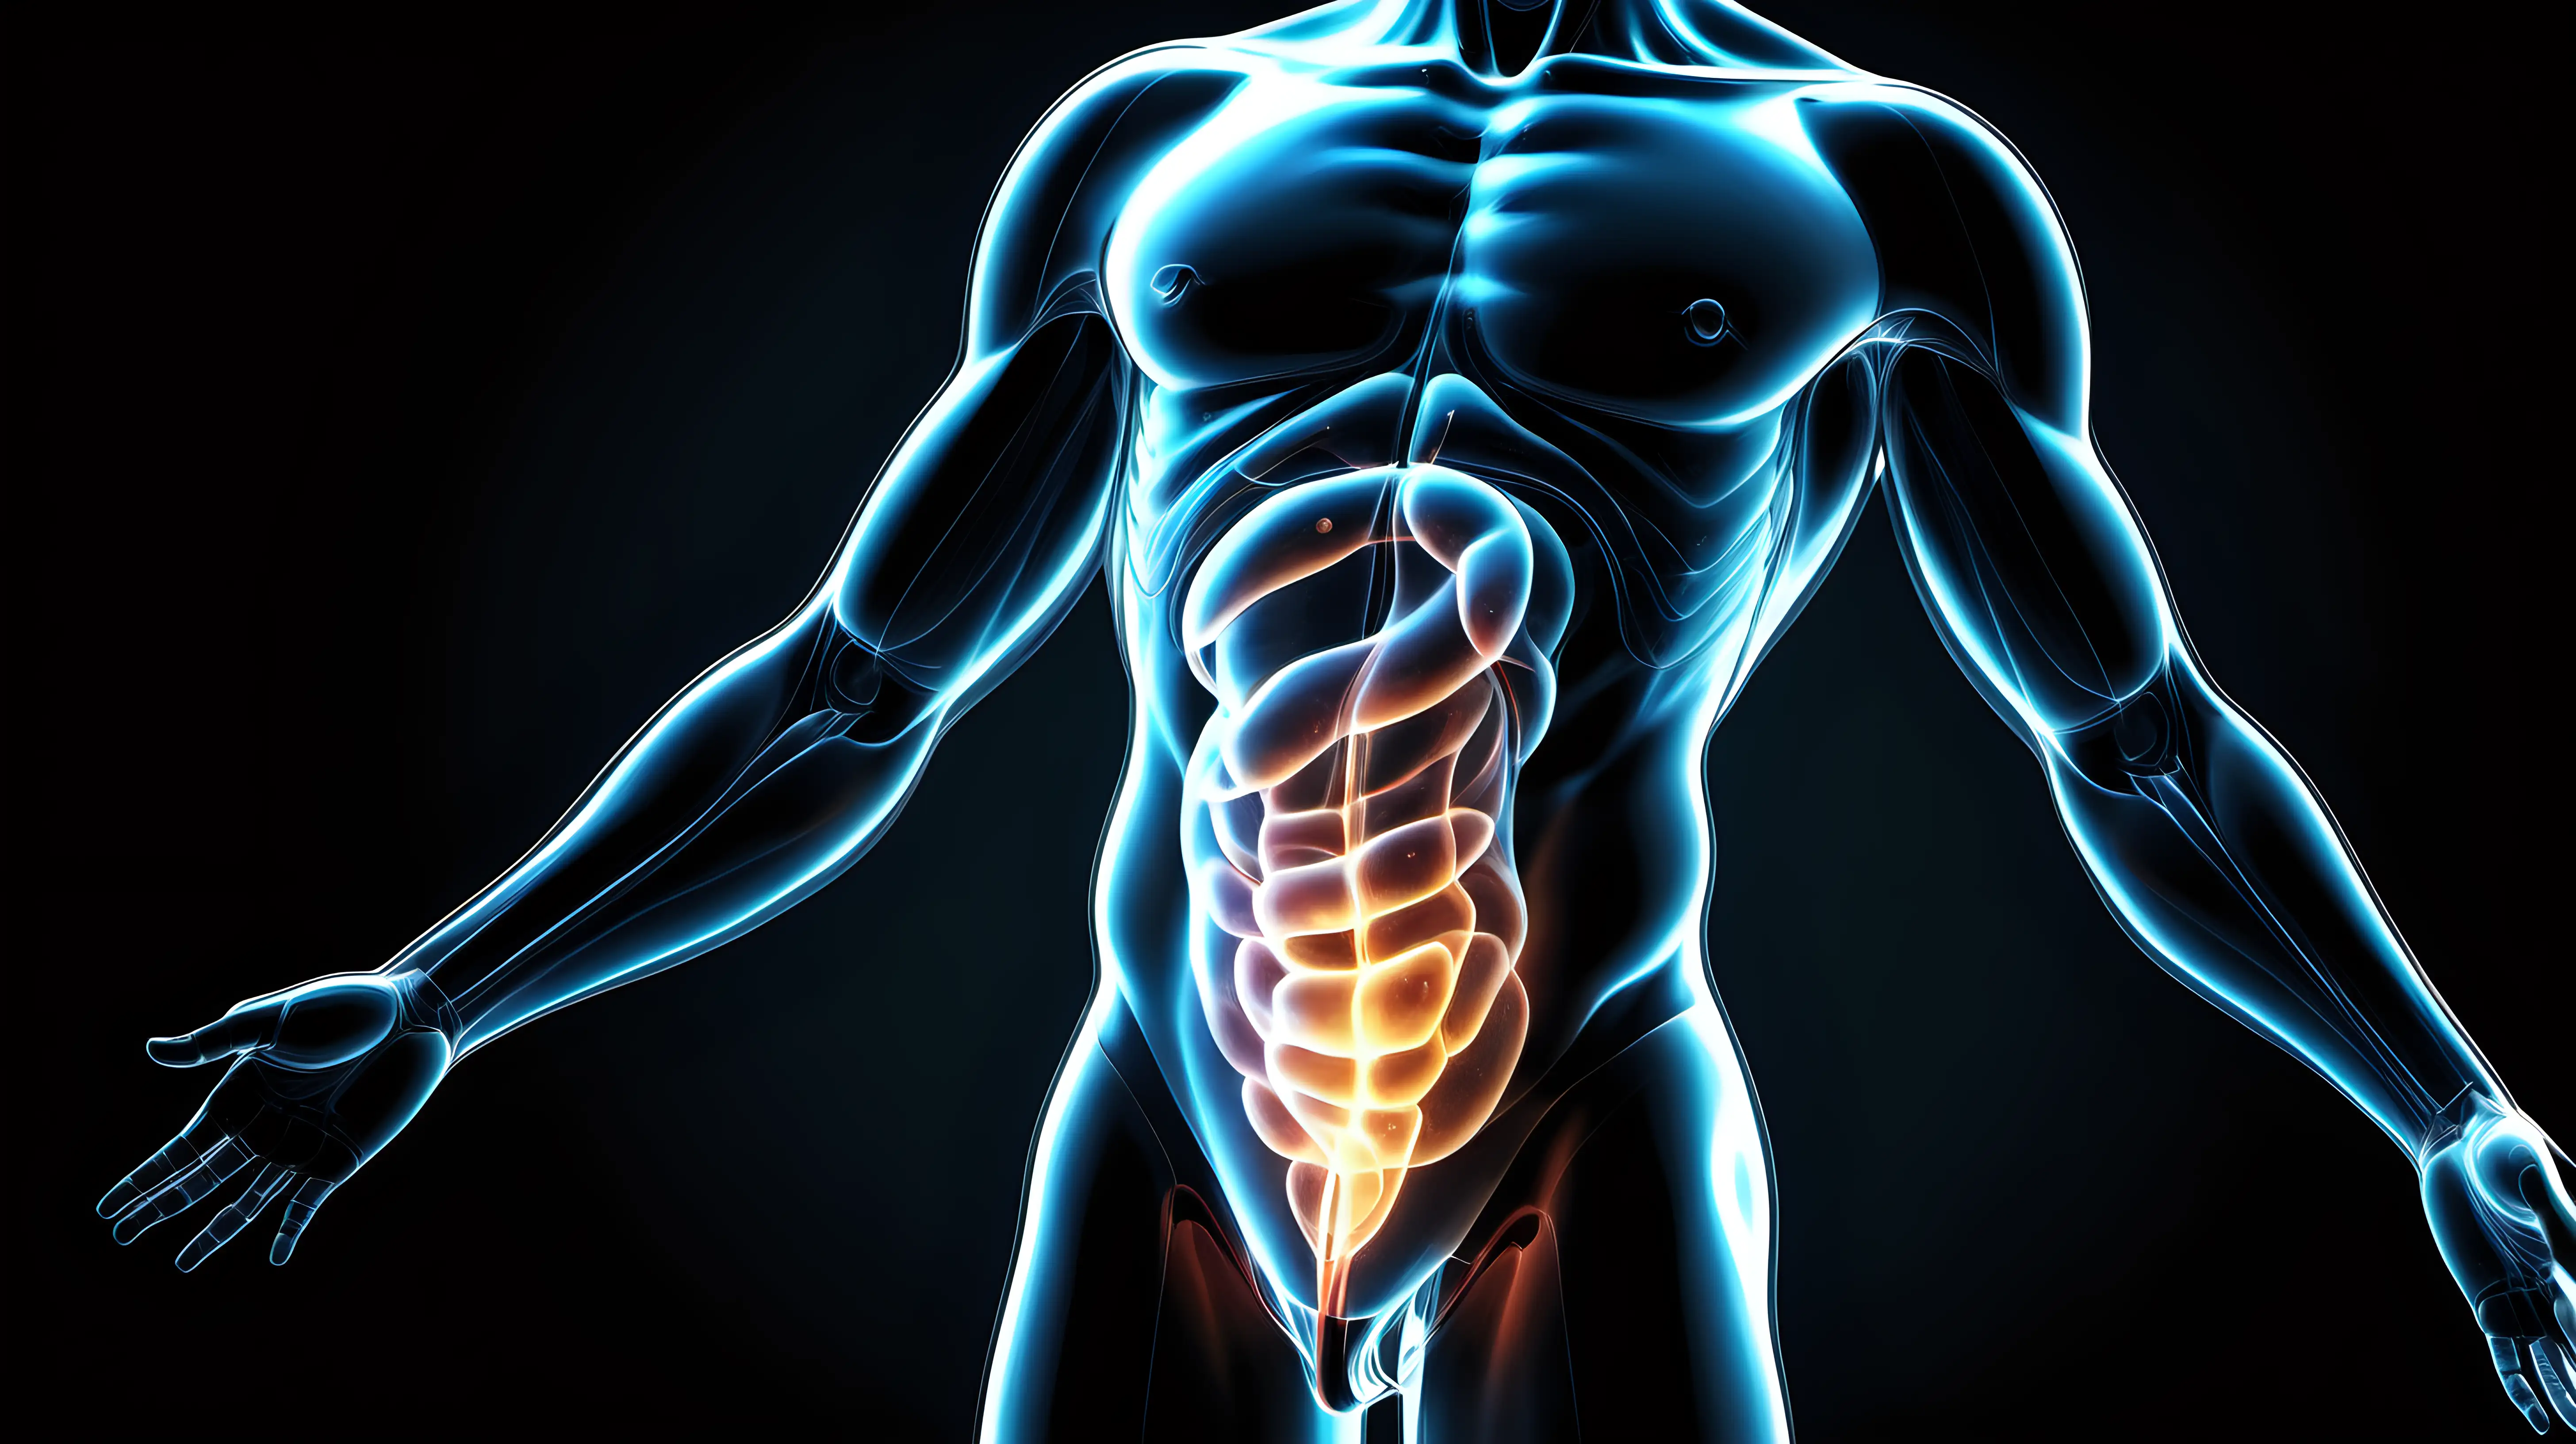 An artistic and scientific visualization of a transparent human figure, showcasing the J-shaped stomach as the focal point against a dark background, creating a captivating and educational composition.